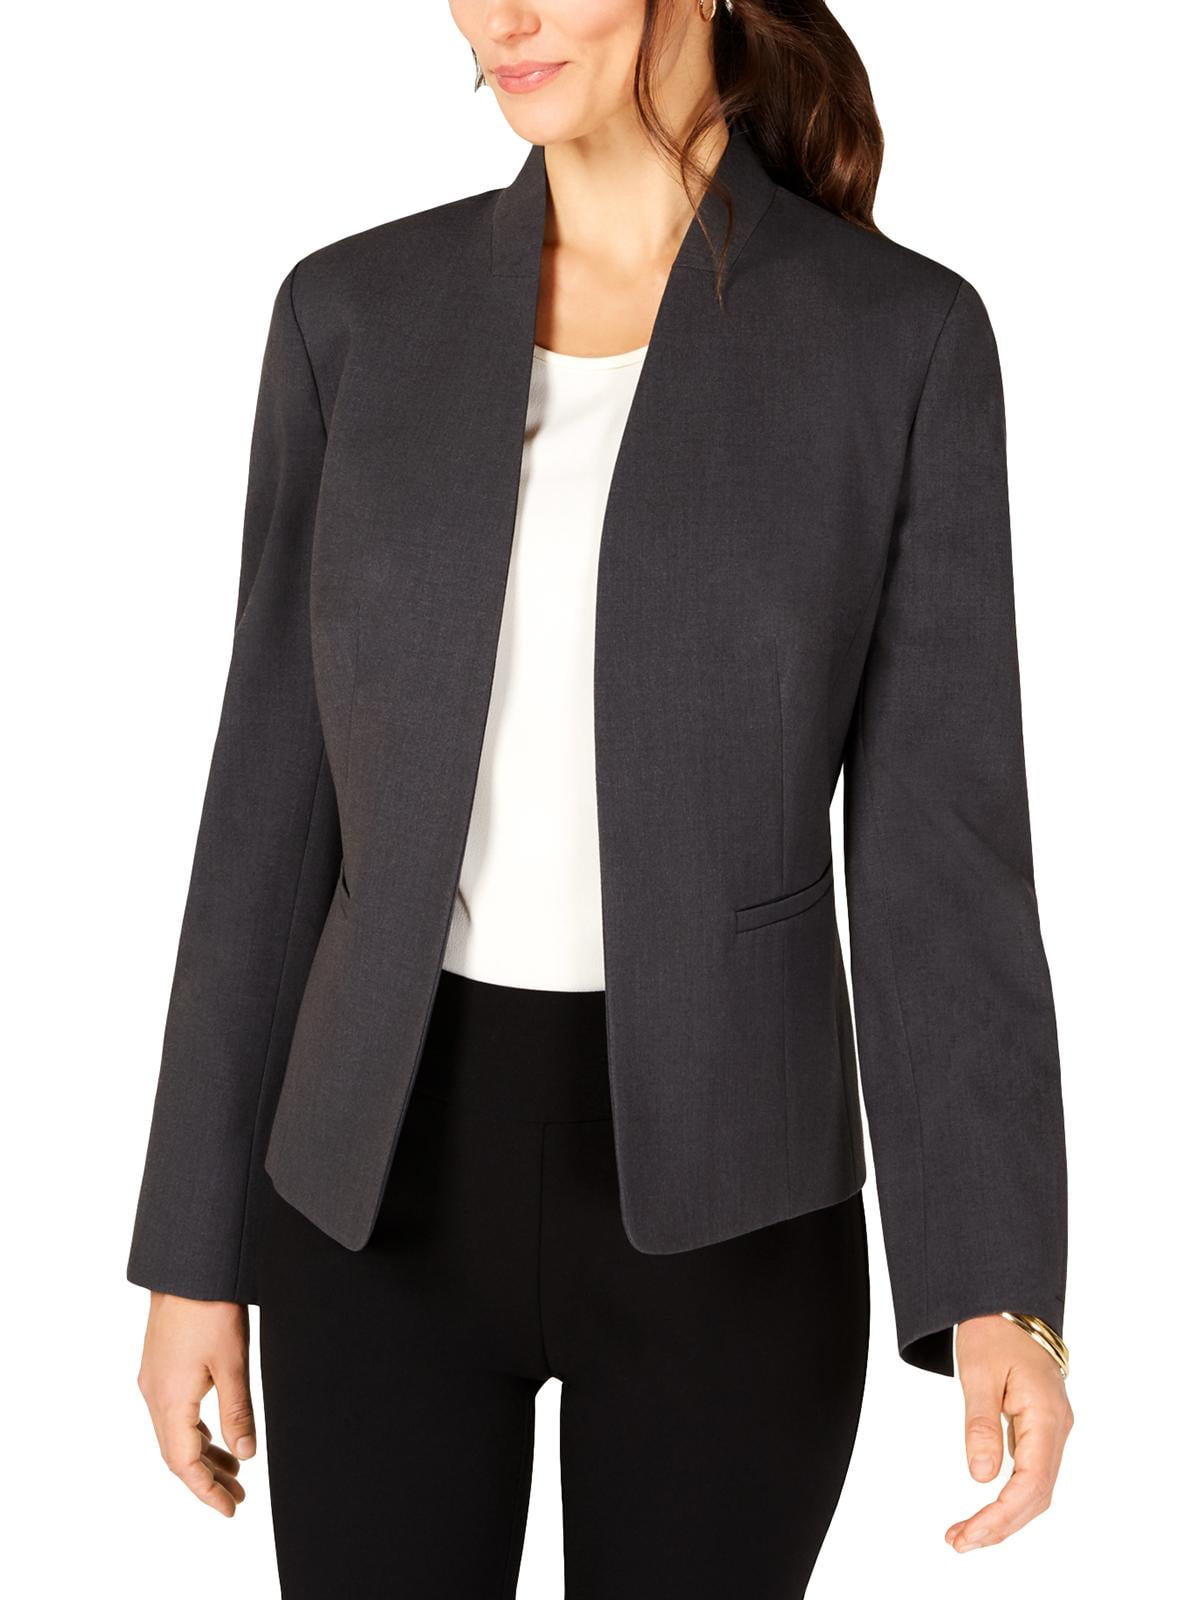 NINE WEST Womens 2 Button Peak Collar Double Breasted Jacket 